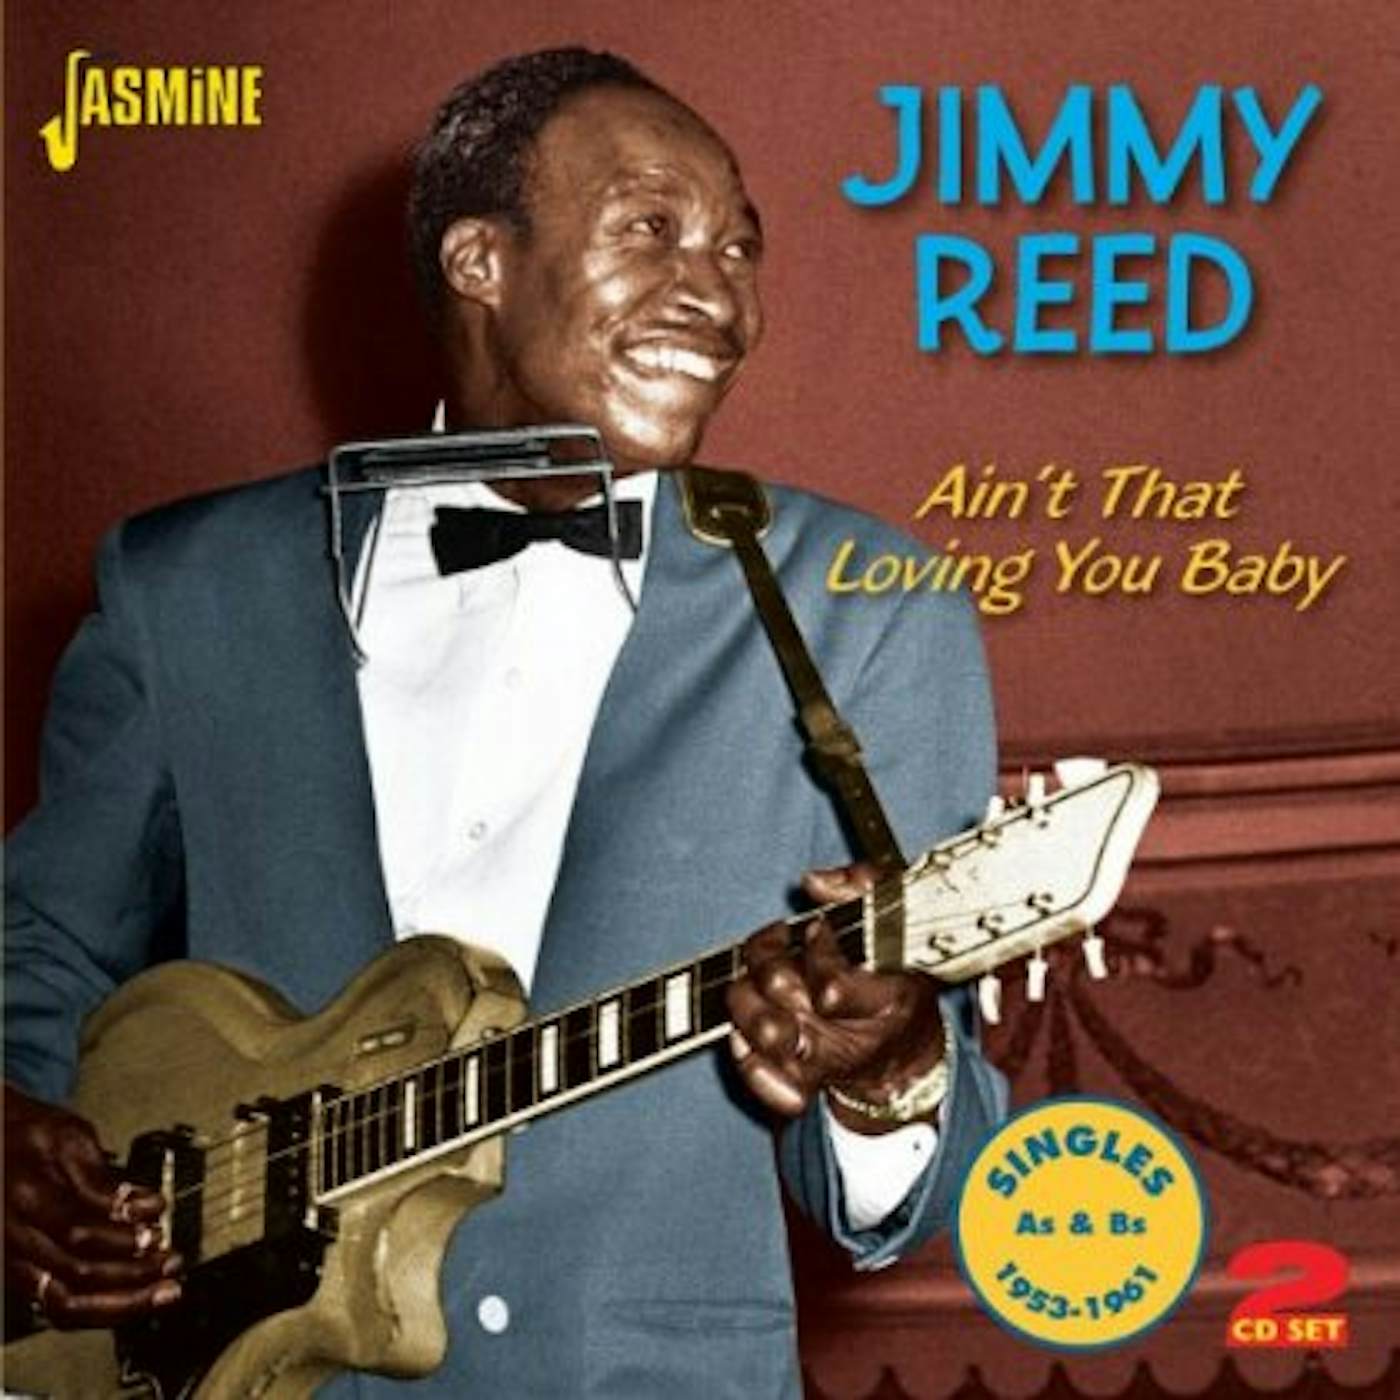 Jimmy Reed AIN'T THAT LOVING YOU CD